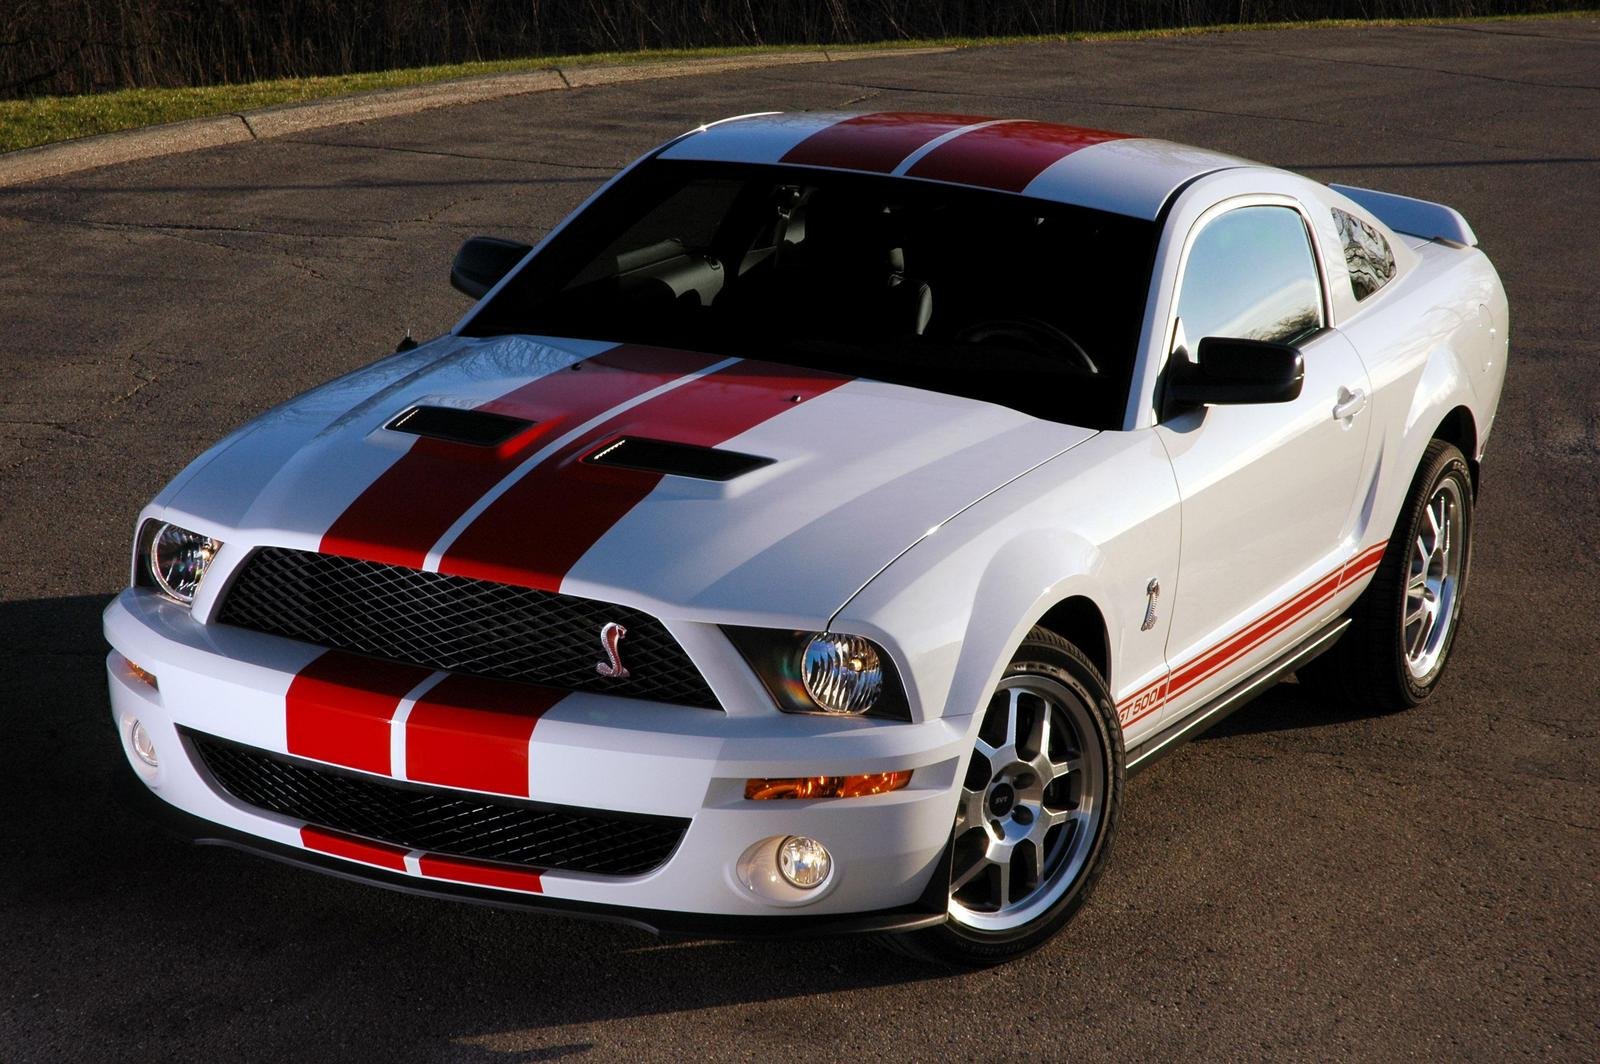 Mustang Of The Day: 2007 Ford Mustang Shelby GT500 Red Stripe Appearance Package